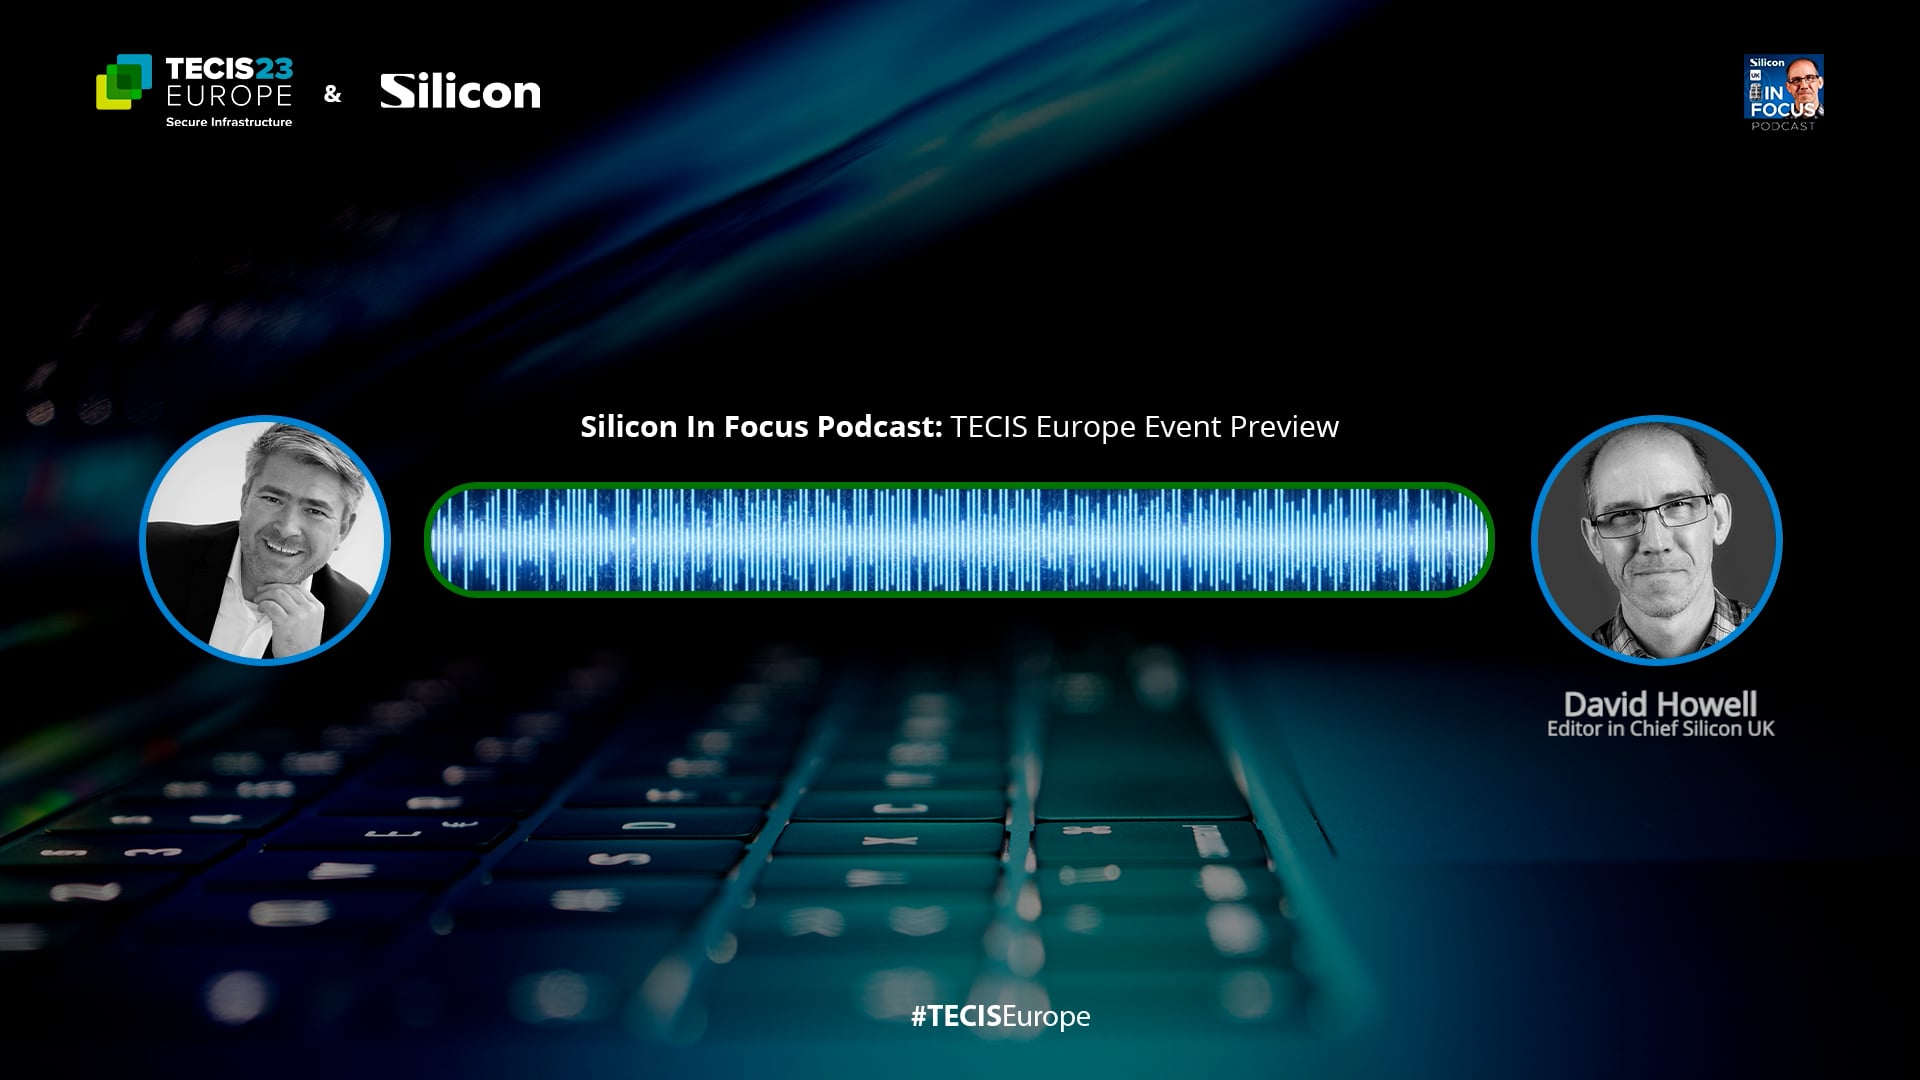 TECIS 2023: Silicon In Focus (with David Howell)